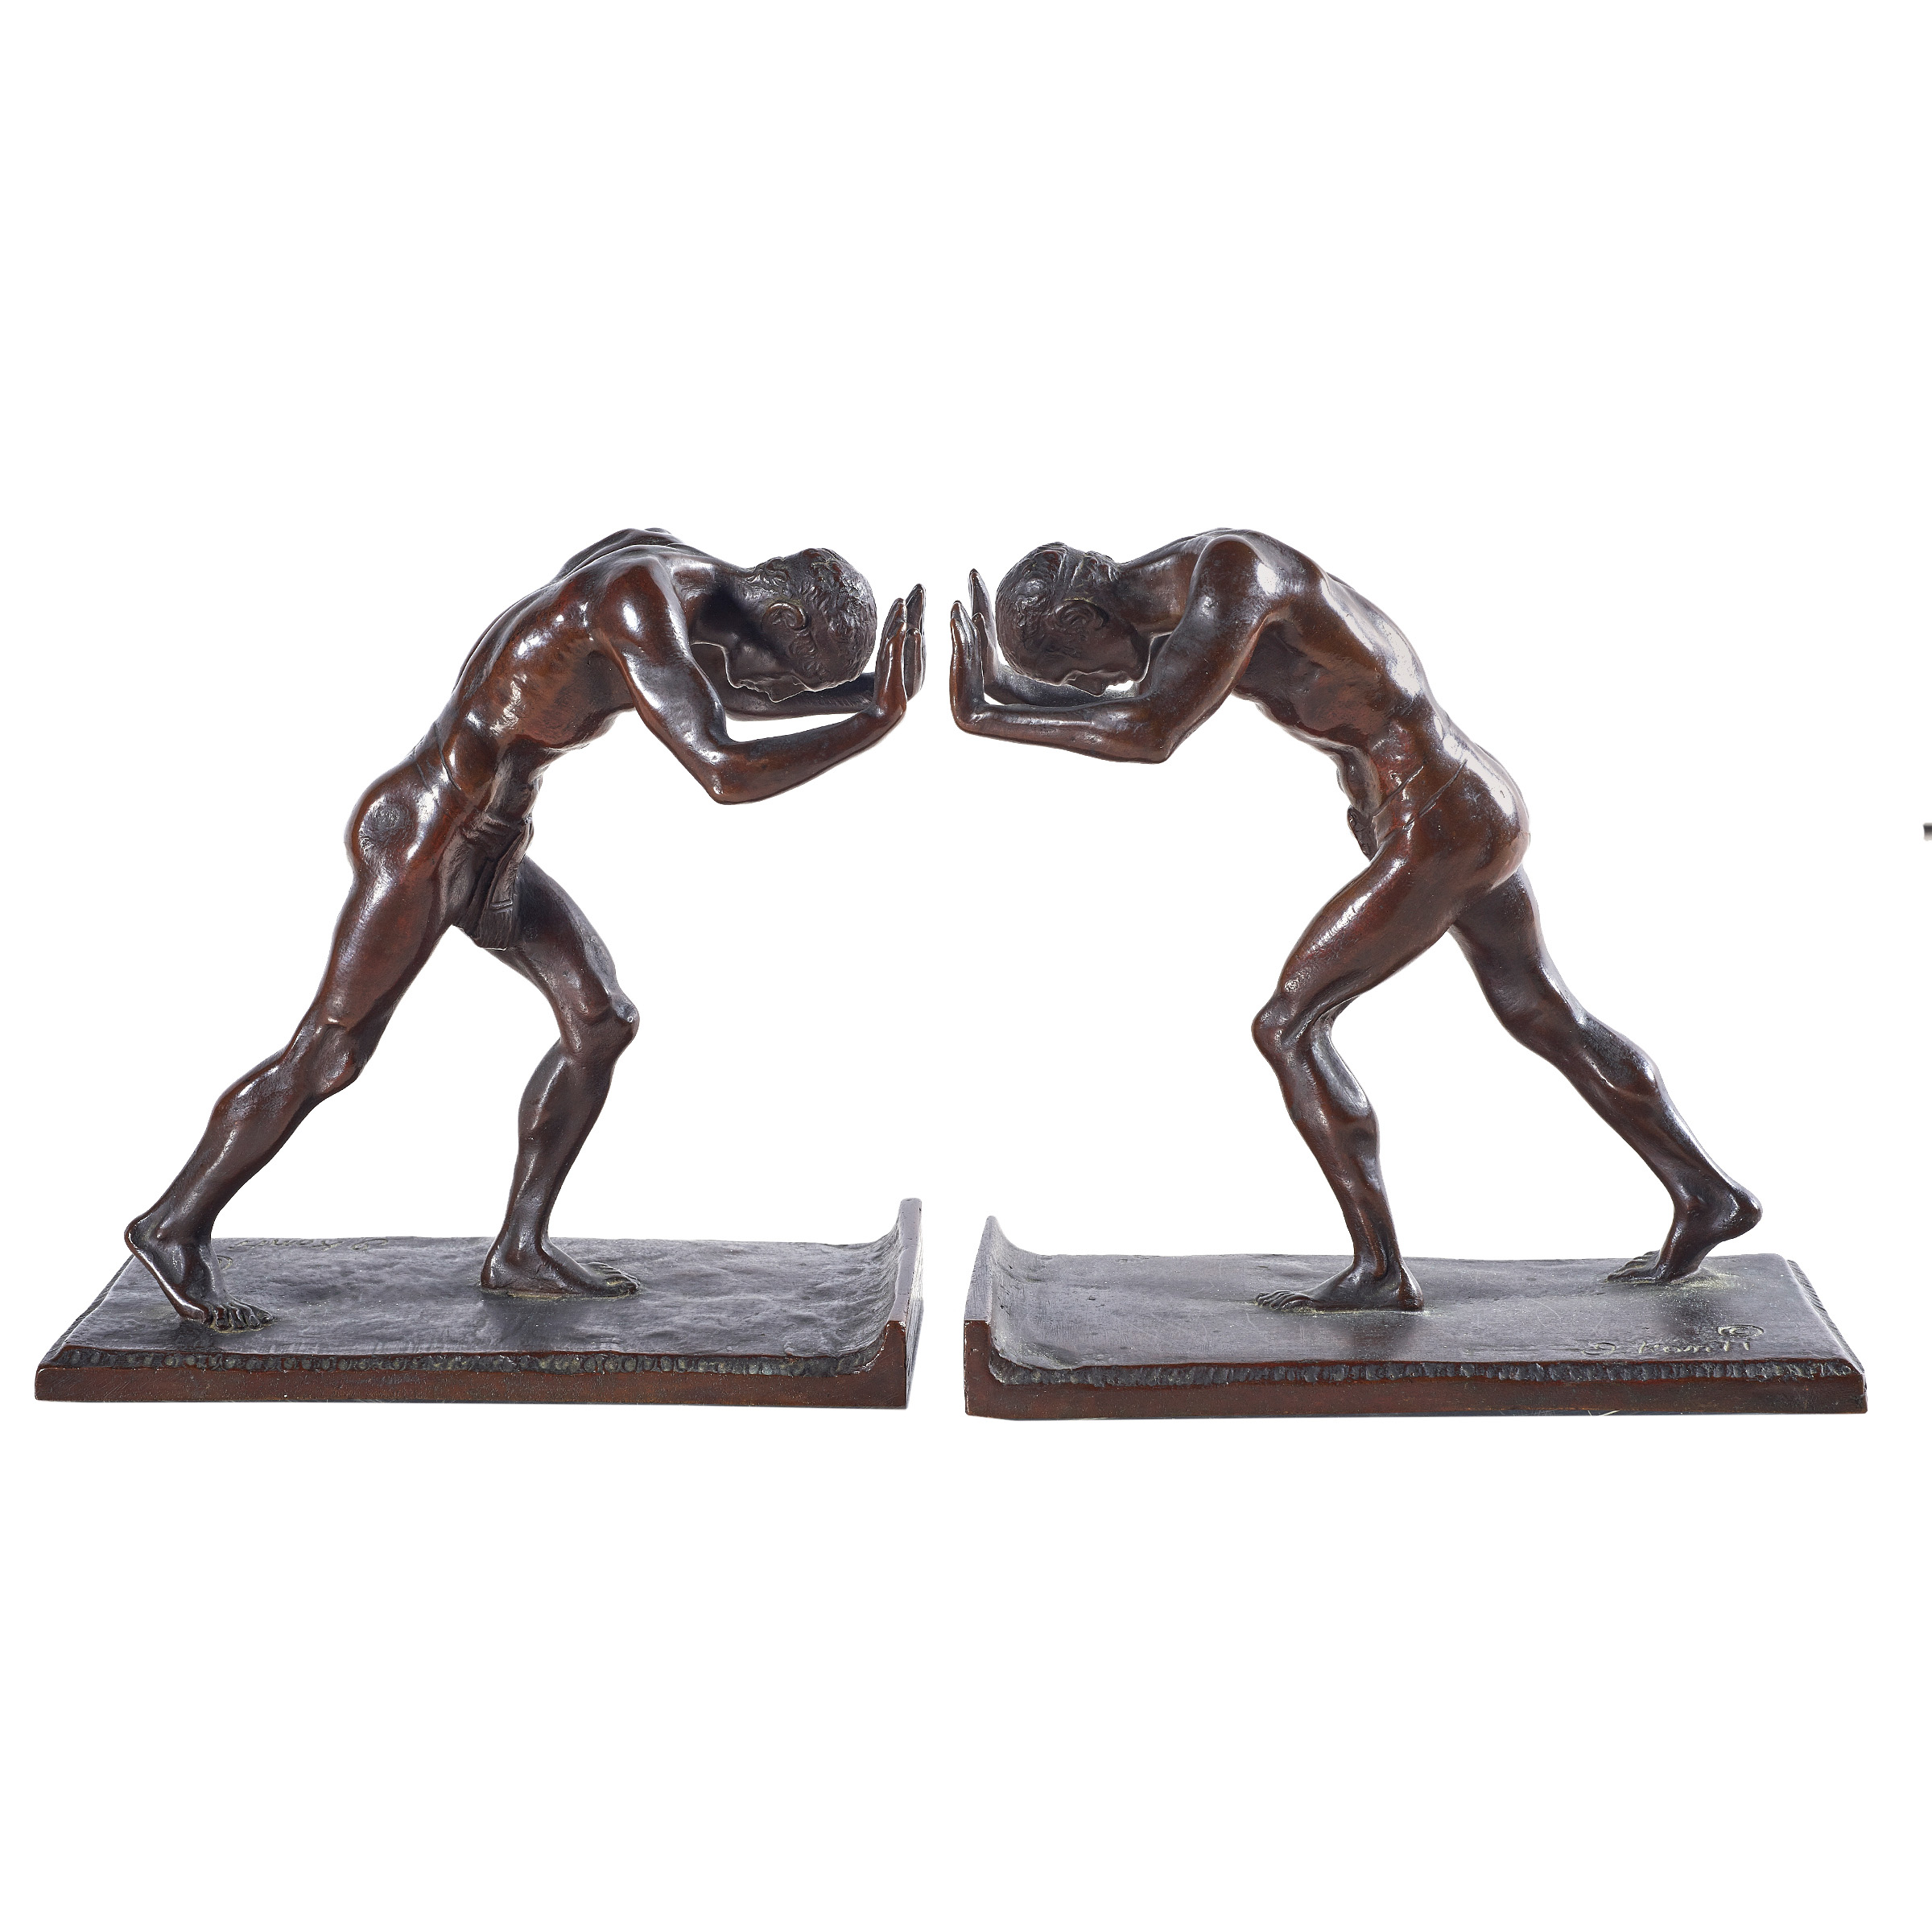 BRONZE BOOKENDS ISIDORE KONTI 3a34d9